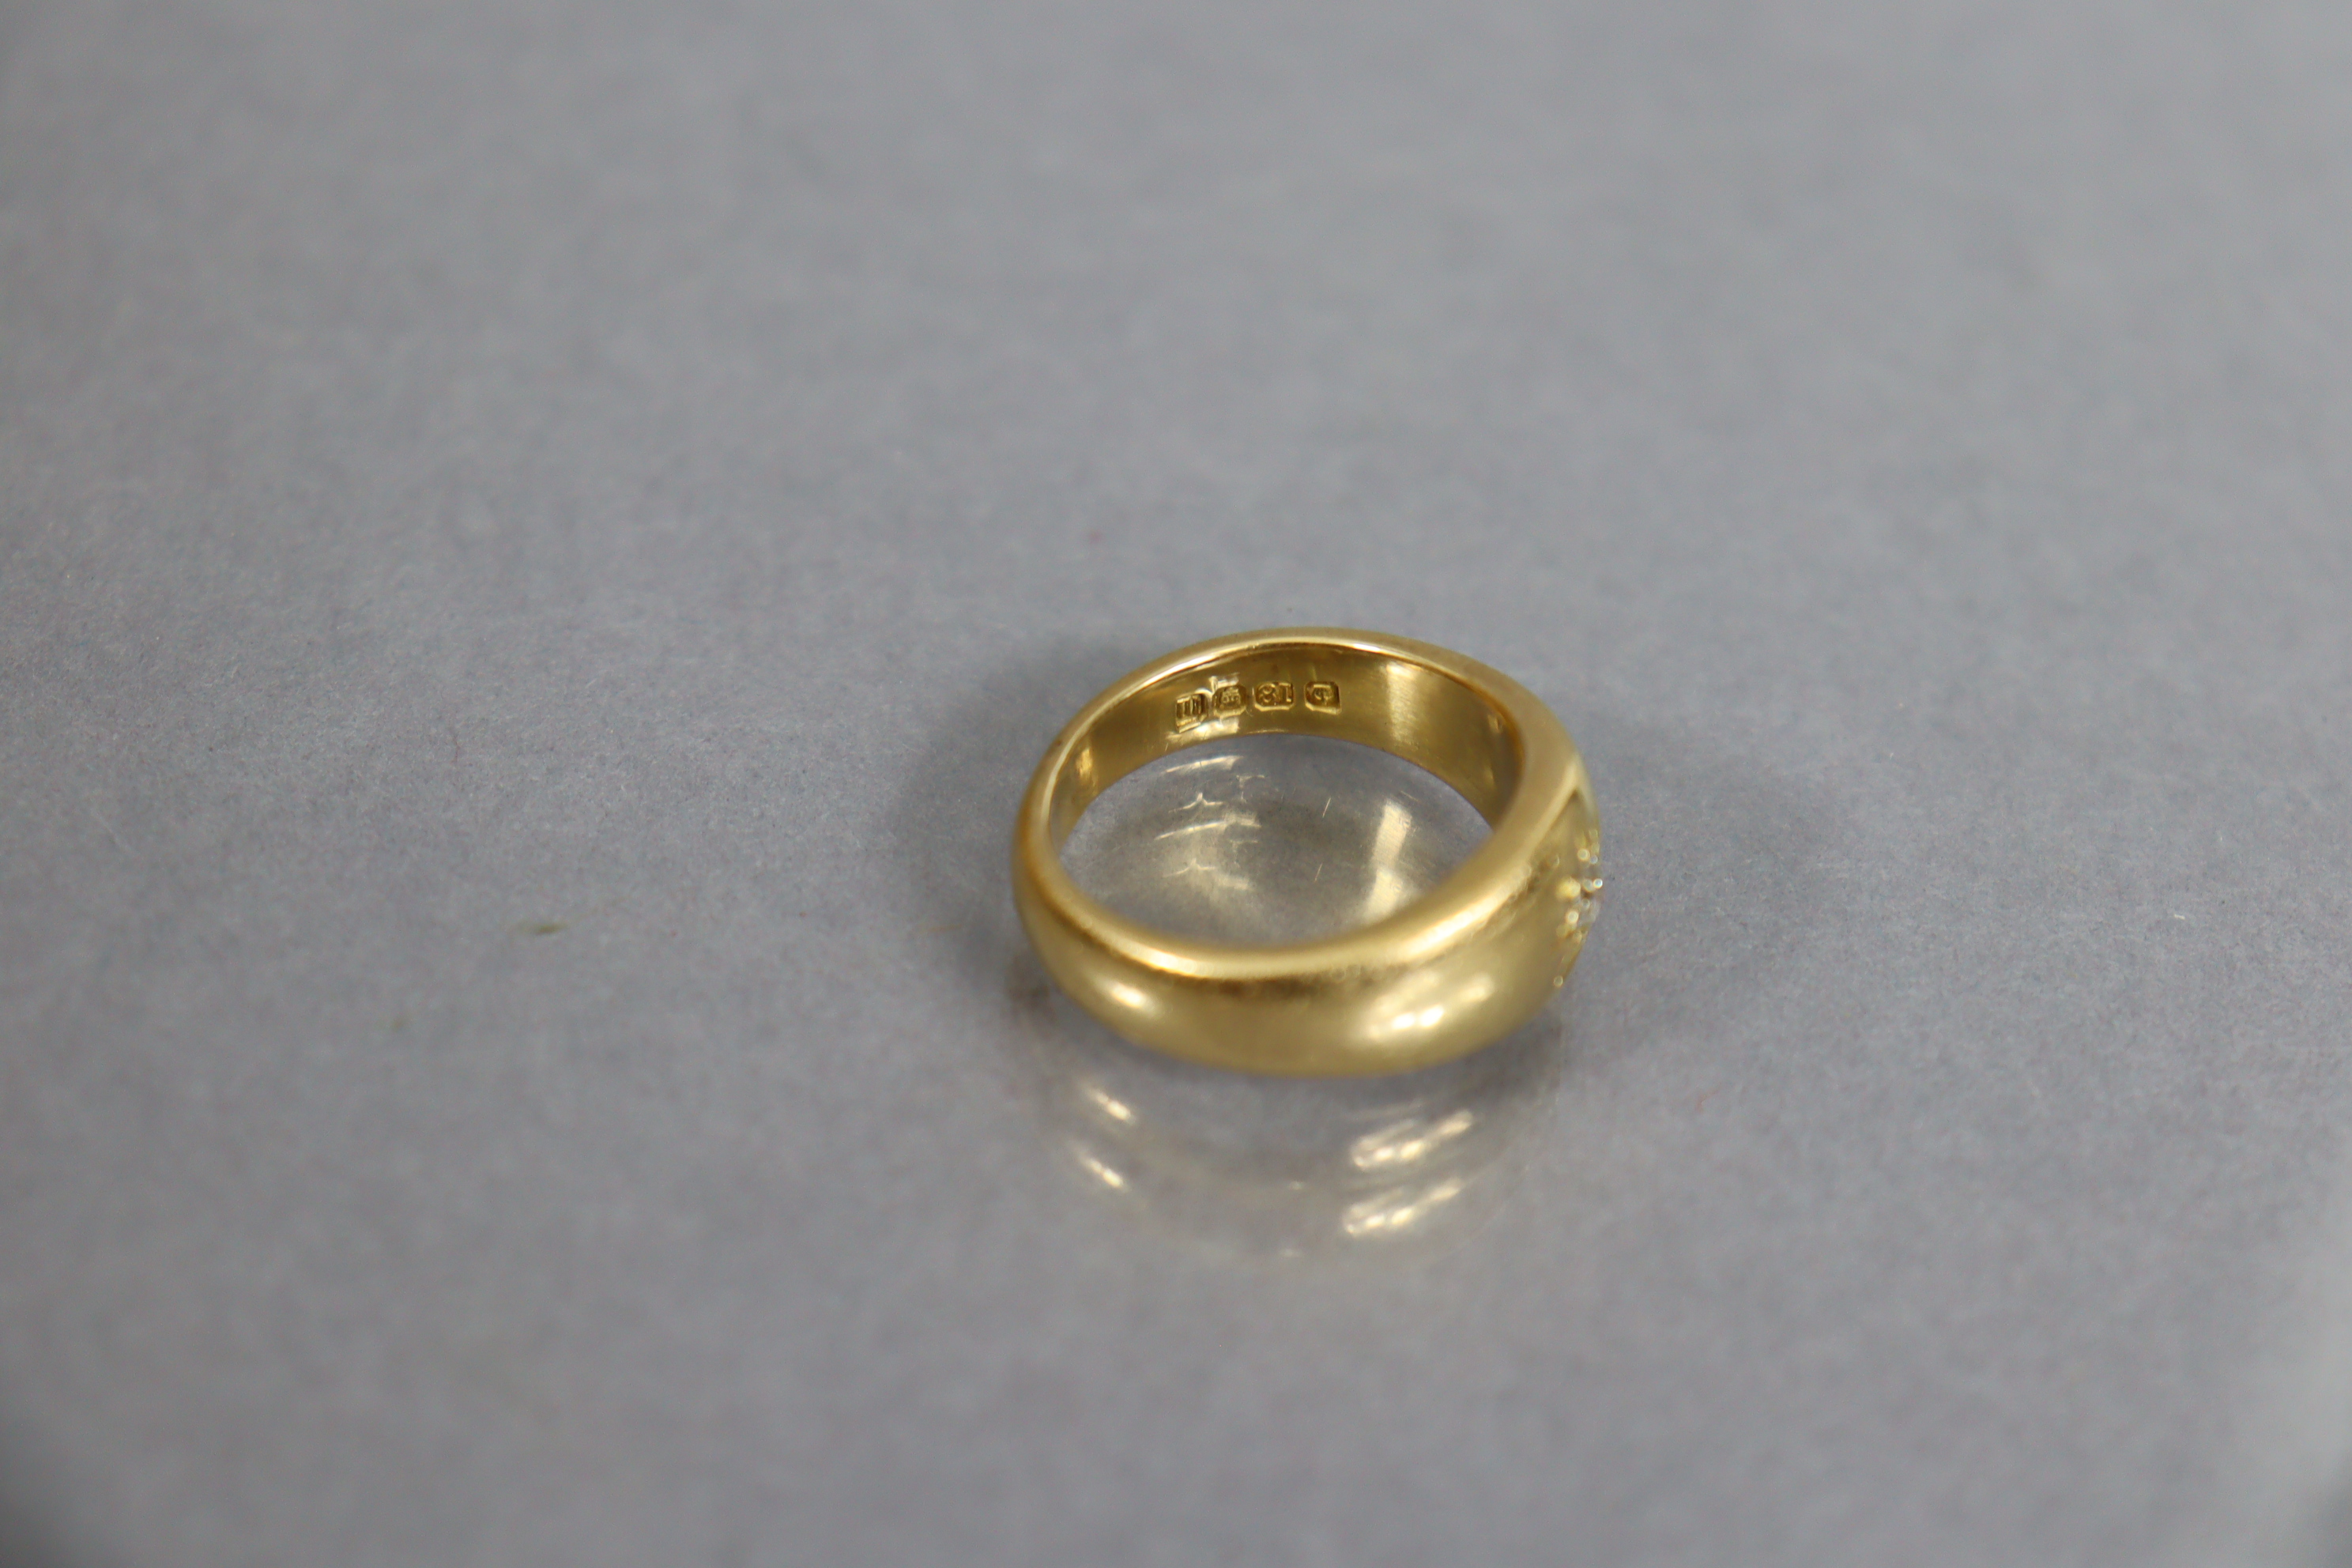 An Edwardian heavy 18ct. gold gent’s ring, gypsy-set with a small diamond; size: S; weight: 14.7gm. - Image 2 of 3